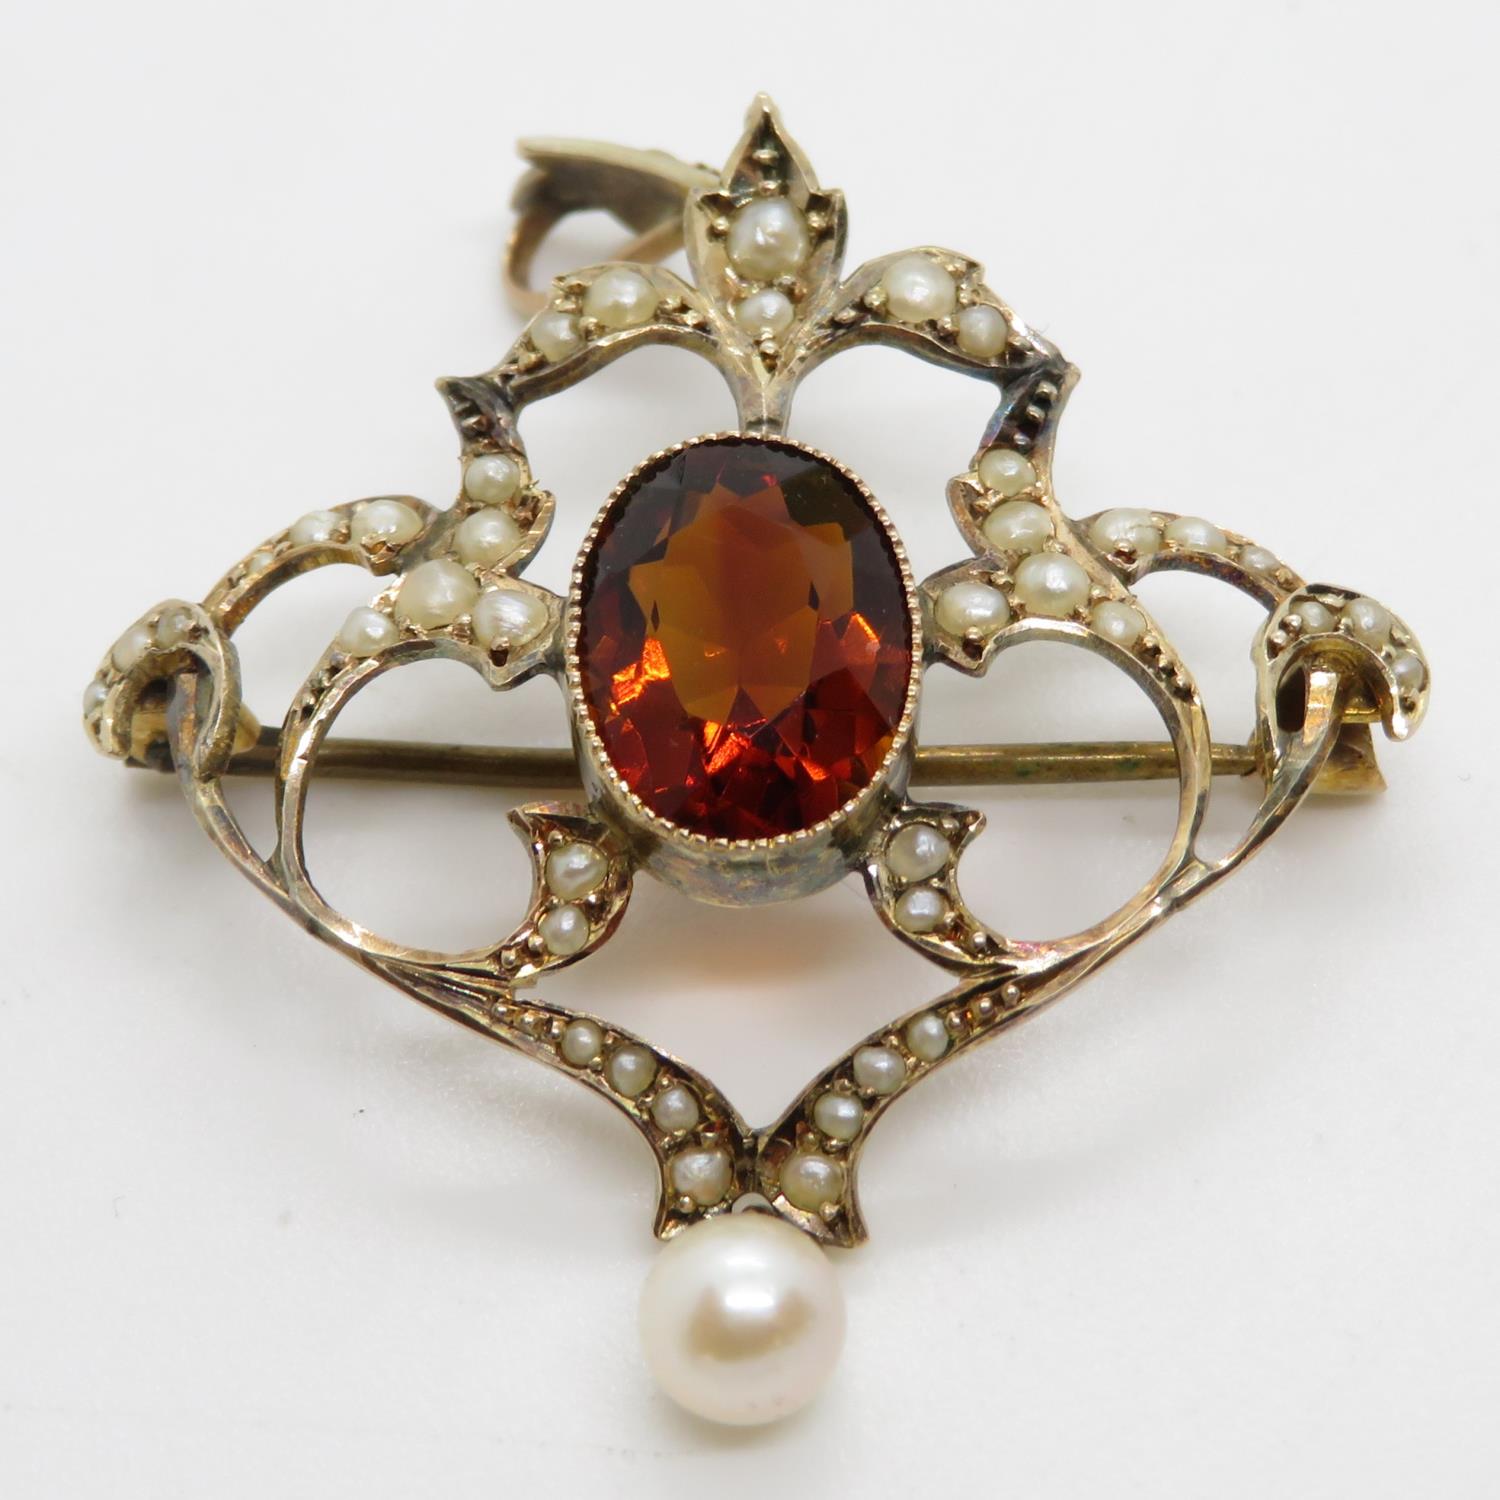 Victorian 9ct gold citrine and pearl brooch pendant C1890